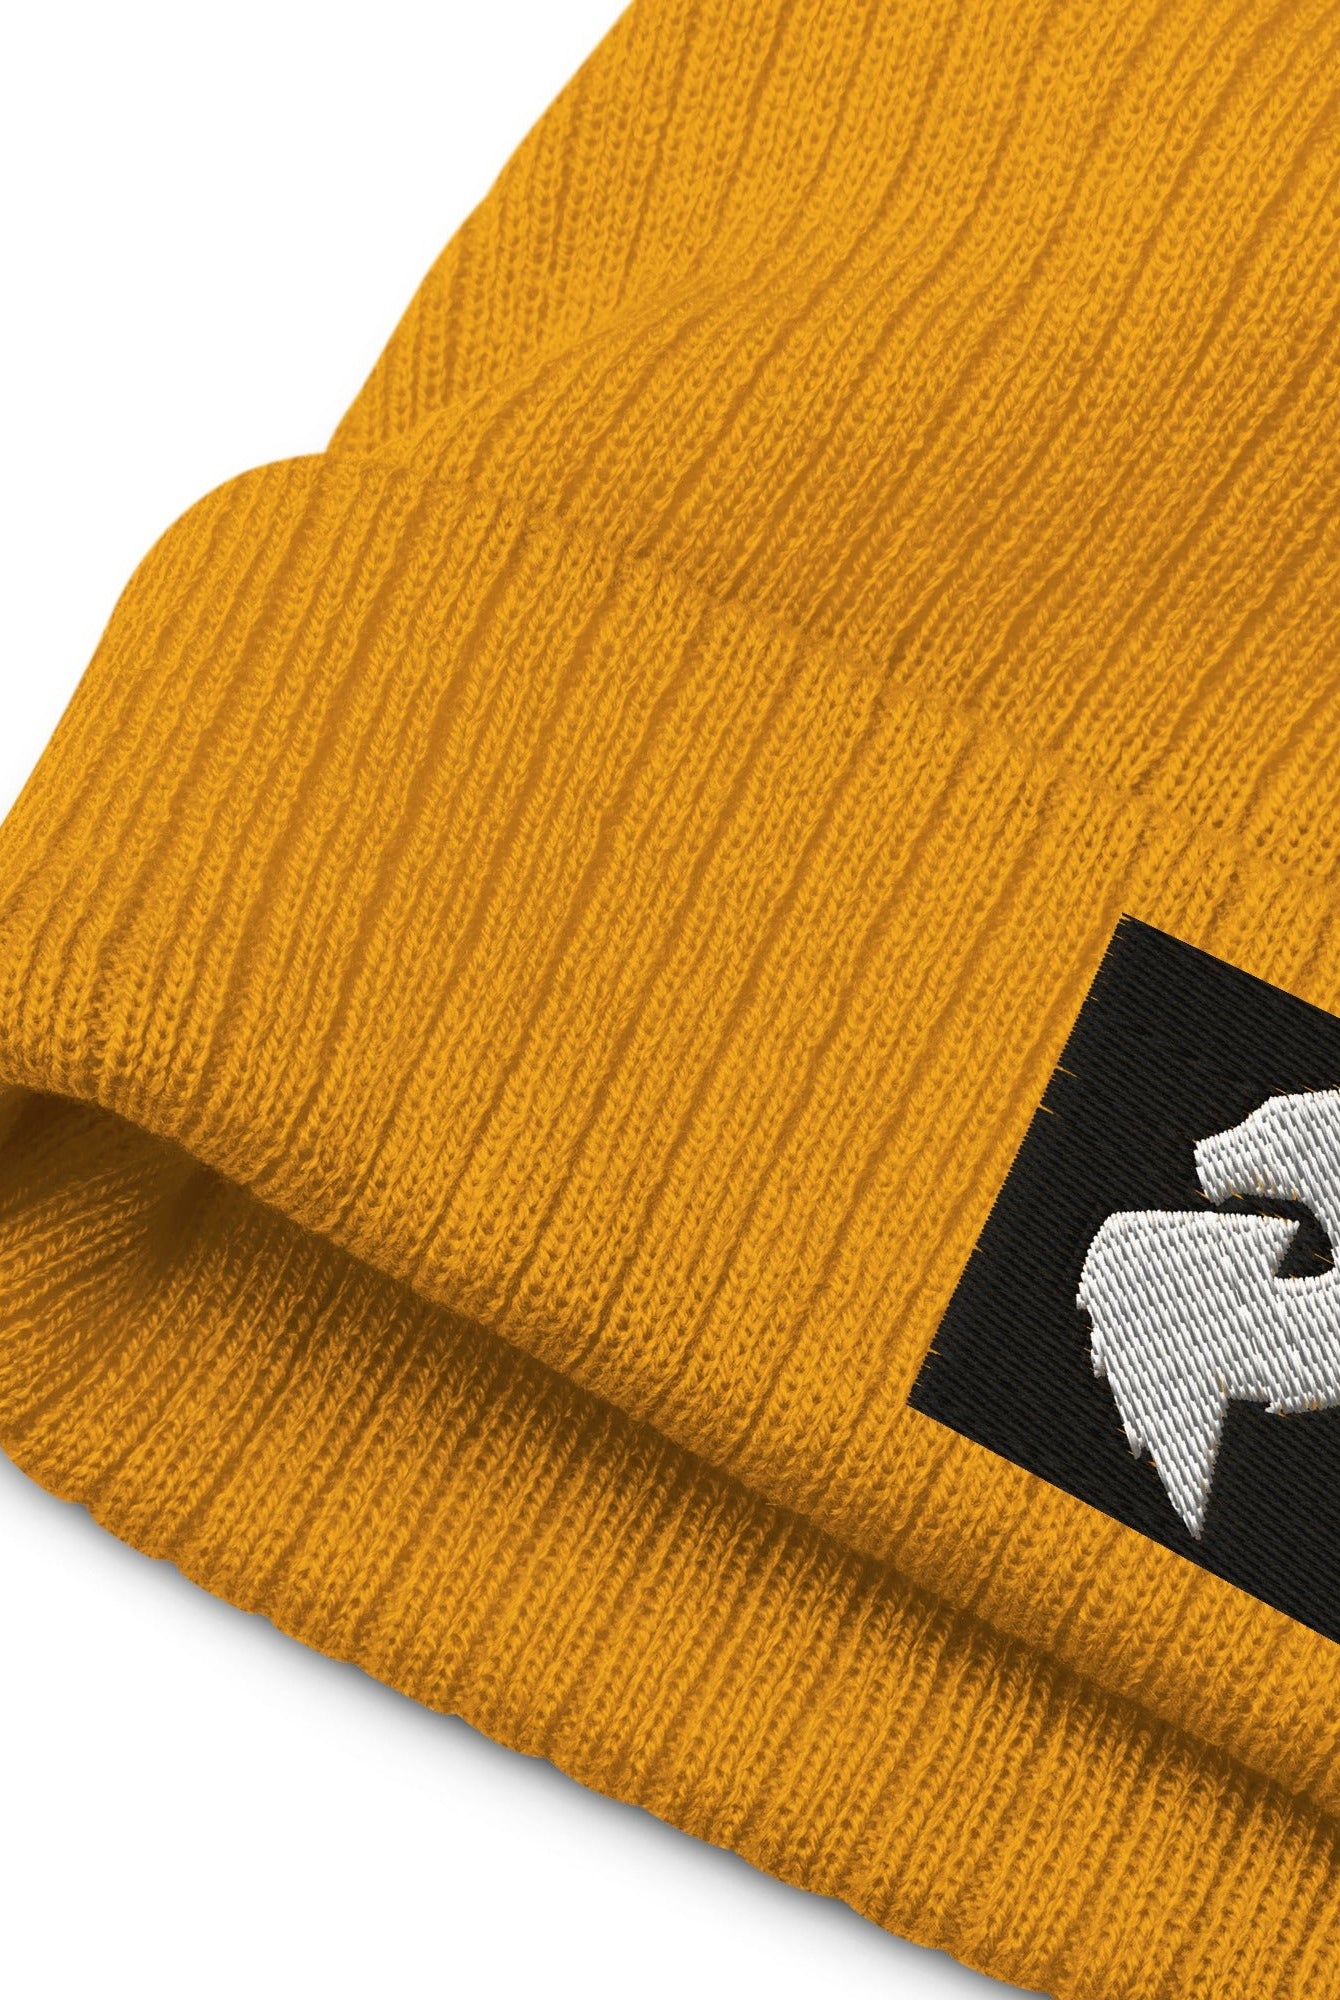 His or Hers Dragon Foxx™ Eco - Ribbed knit beanie - His or Hers Dragon Foxx™ Eco - Ribbed knit beanie - DRAGON FOXX™ - His or Hers Dragon Foxx™ Eco - Ribbed knit beanie - 2867494_13240 - Mustard - - Accessories - Acid Green Eco - Ribbed knit beanie - Beanie